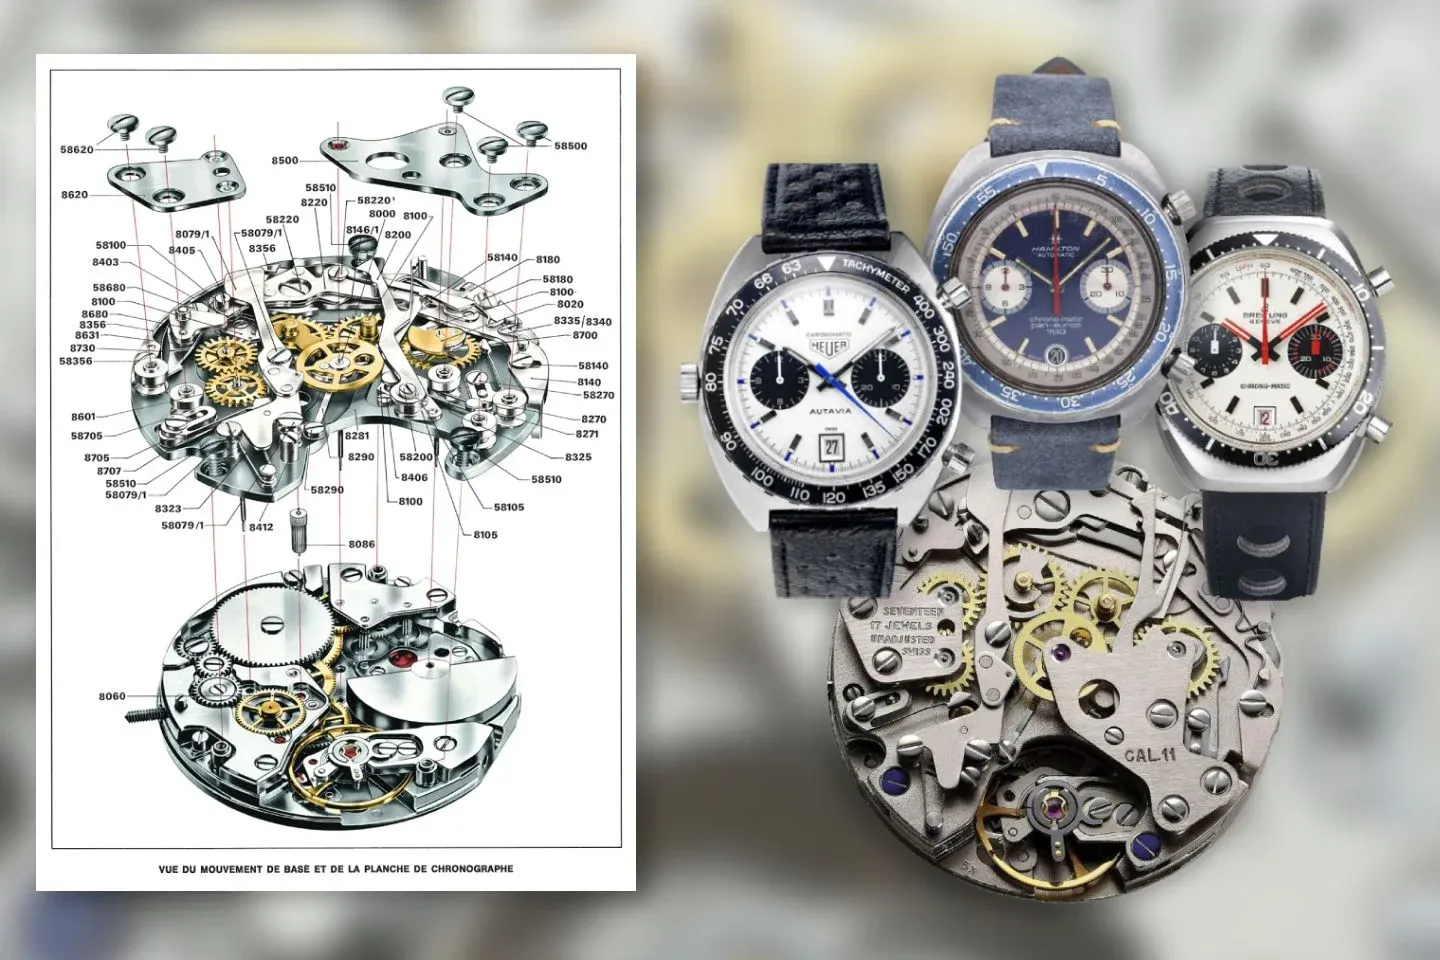 The Caliber 11’s chronograph module was mated with the modified version of Bruen's micro-rotor movements (calibers 1000 and 1001)